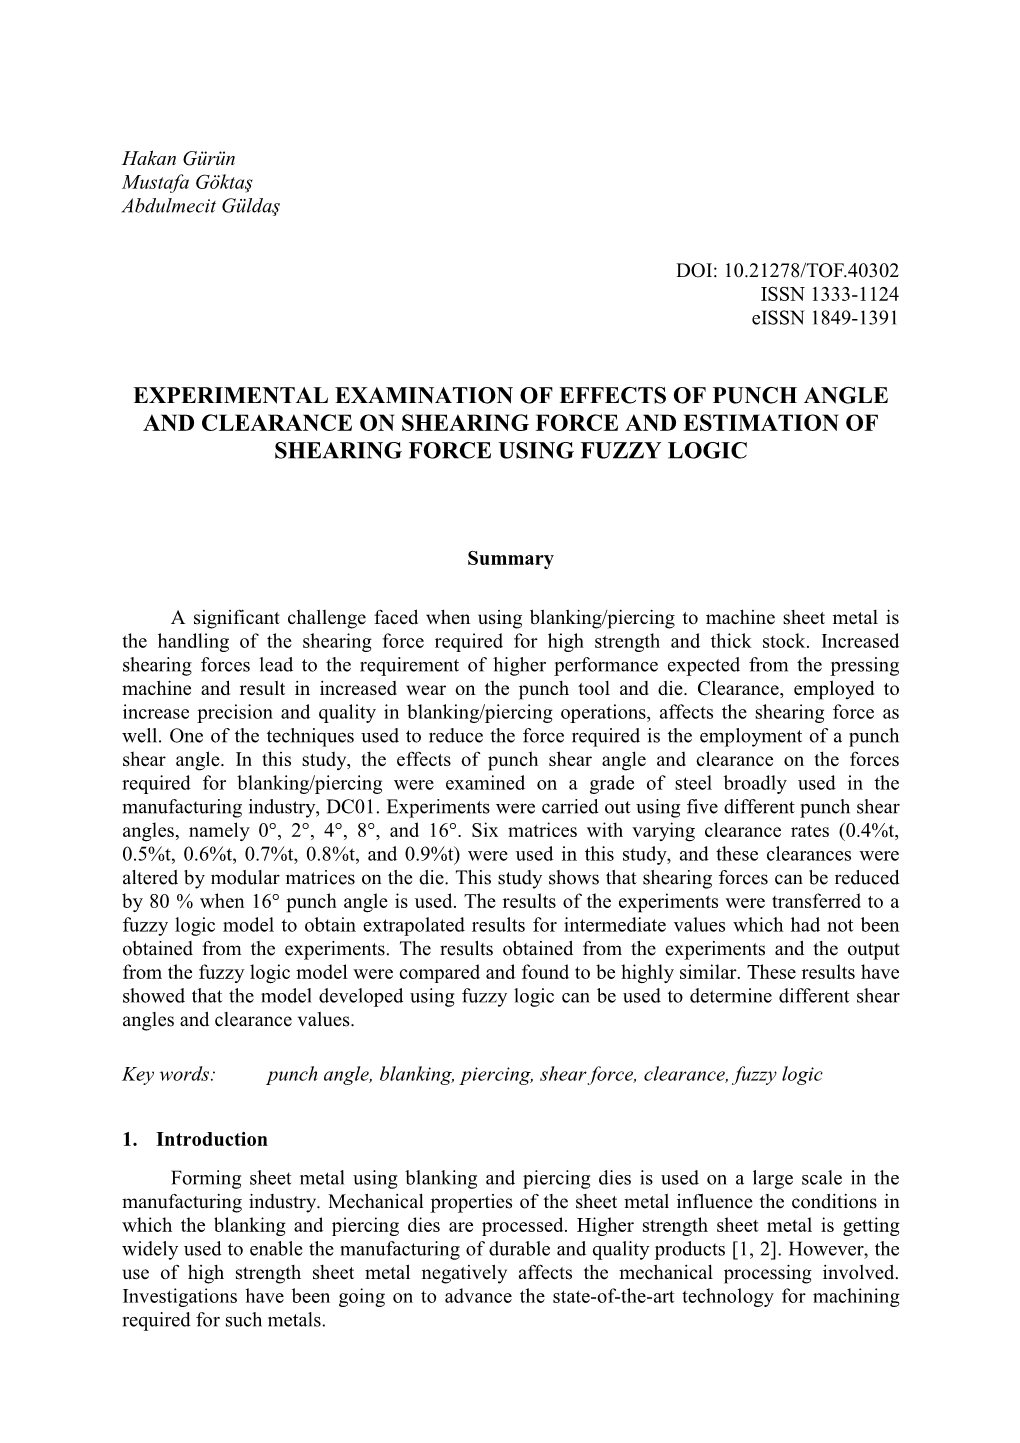 Experimental Examination of Effects of Punch Angle and Clearance on Shearing Force and Estimation of Shearing Force Using Fuzzy Logic